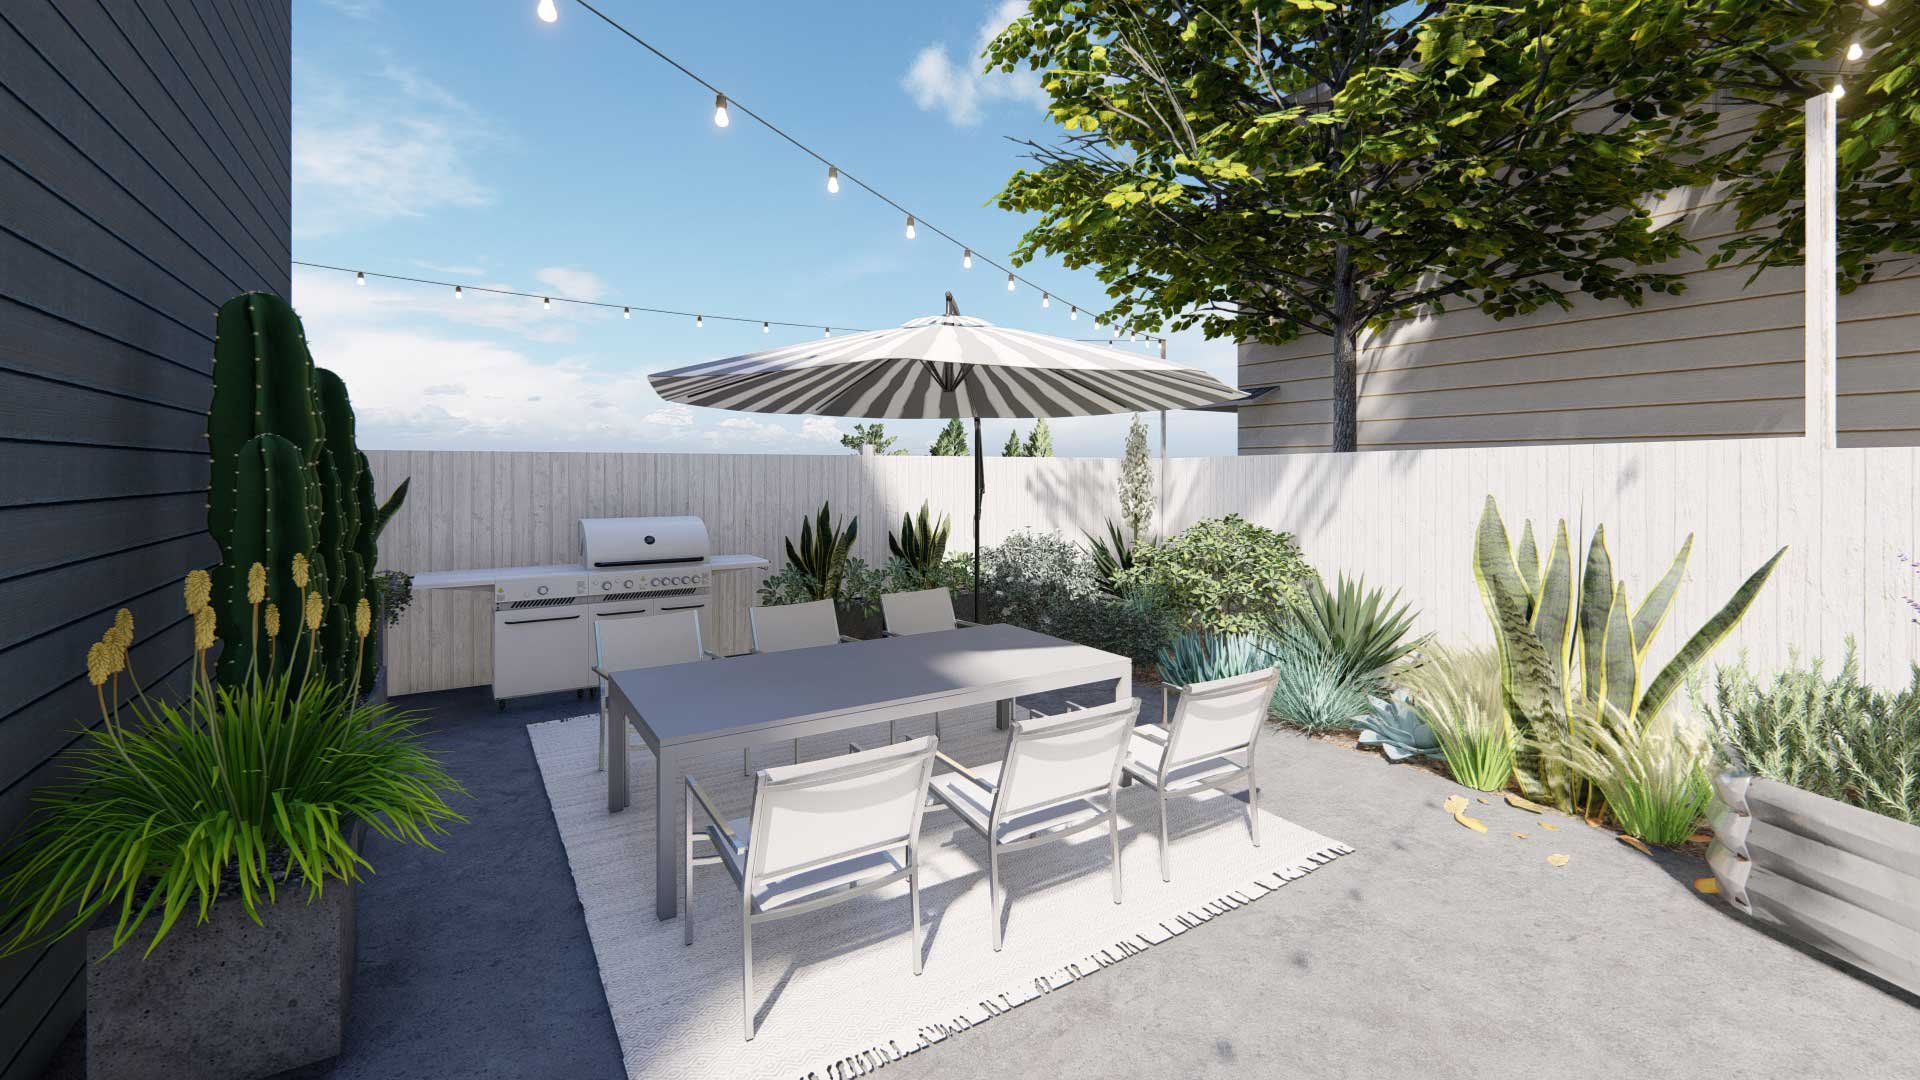 Outdoor kitchen and dining area in Los Angeles, CA back yard